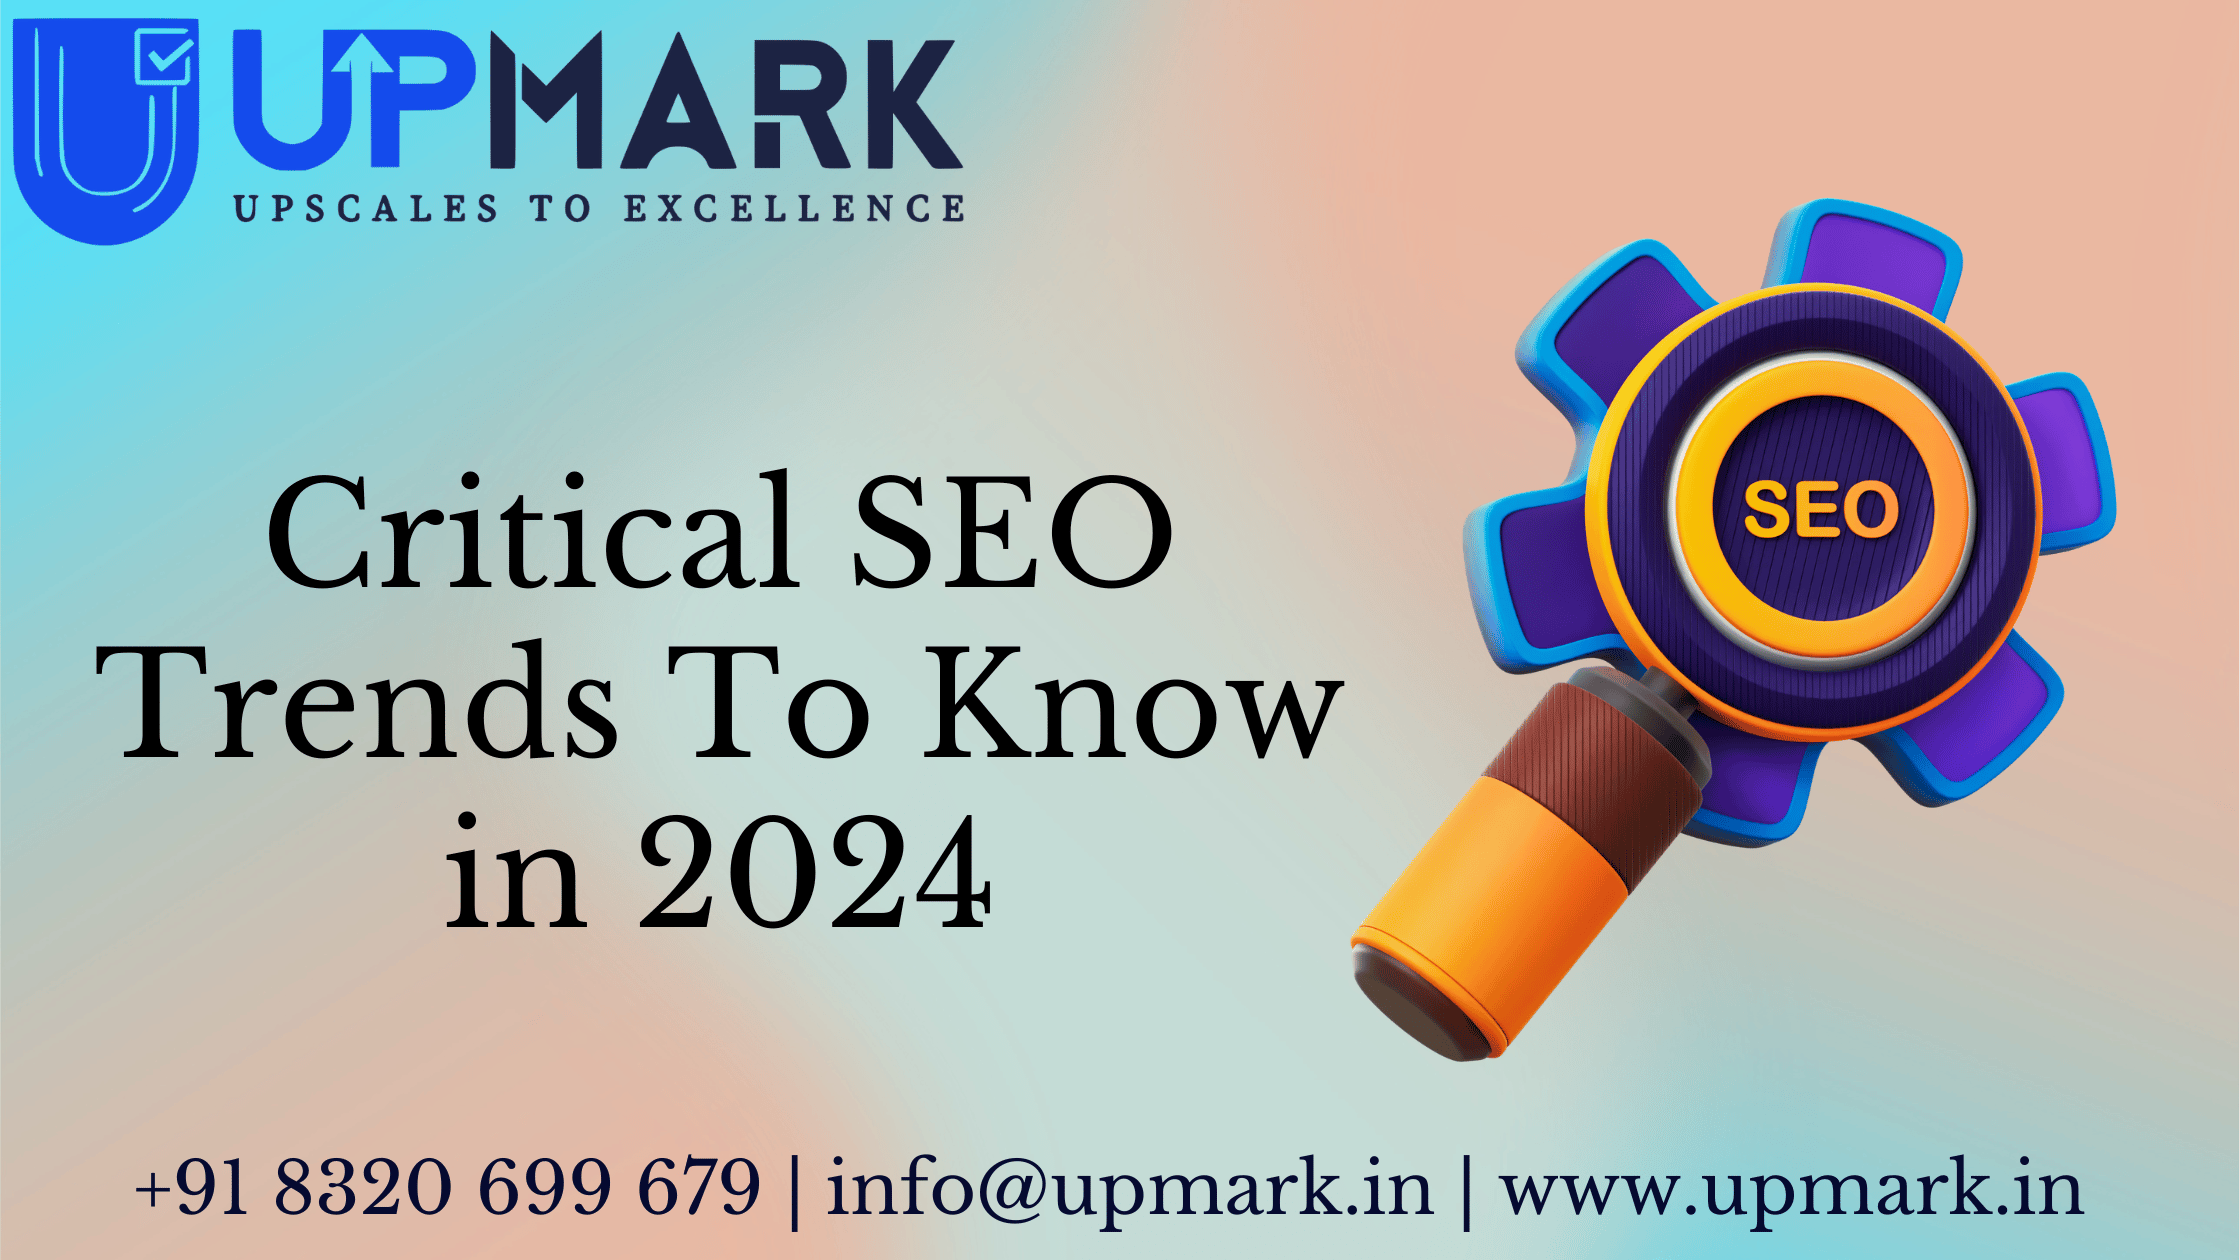 Critical SEO Trends To Know in 2024